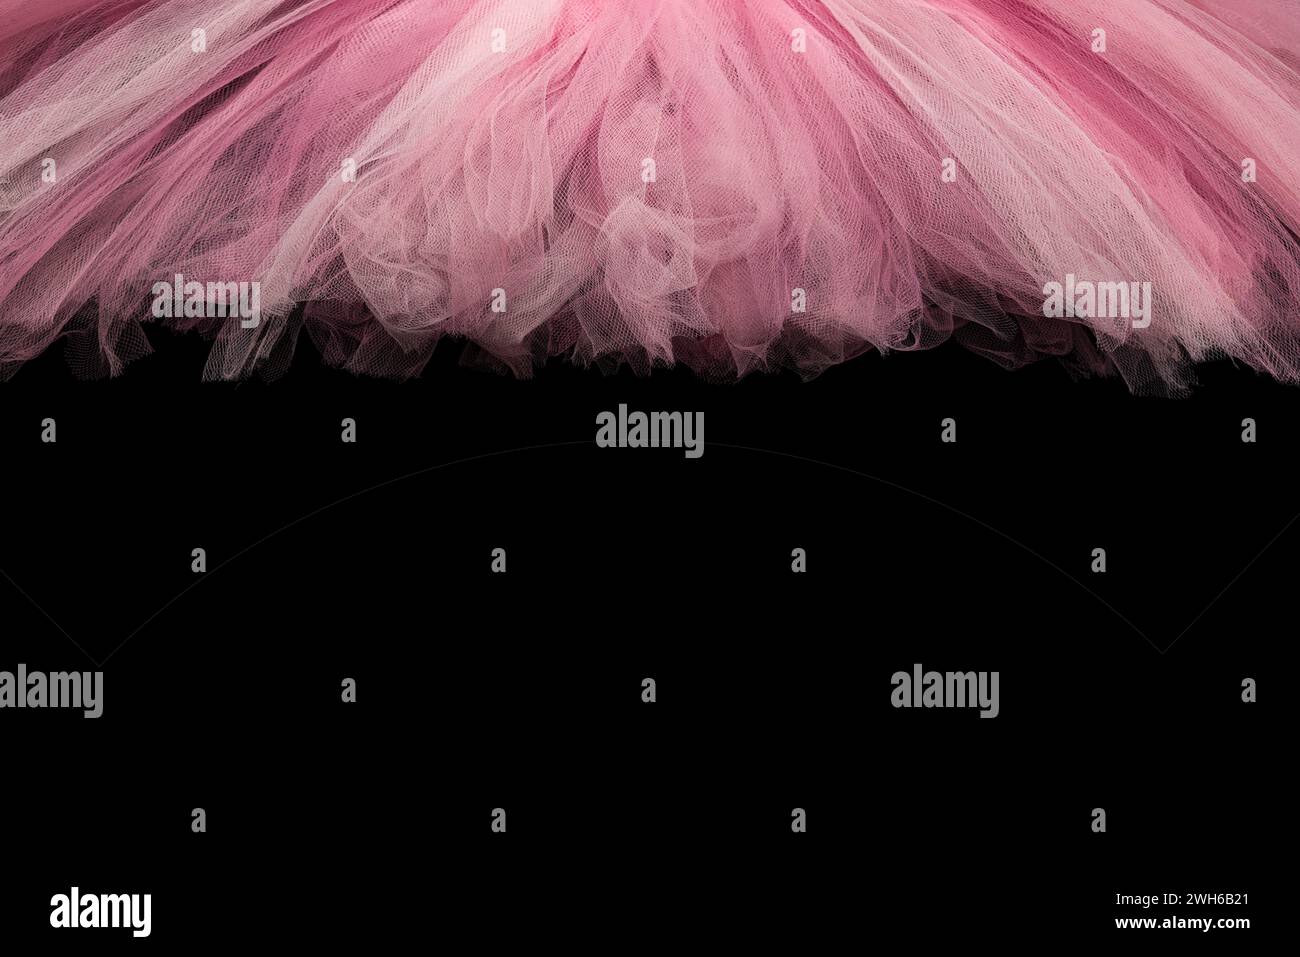 Pink tule tutu fabric used for graphic border frames Stock Photo